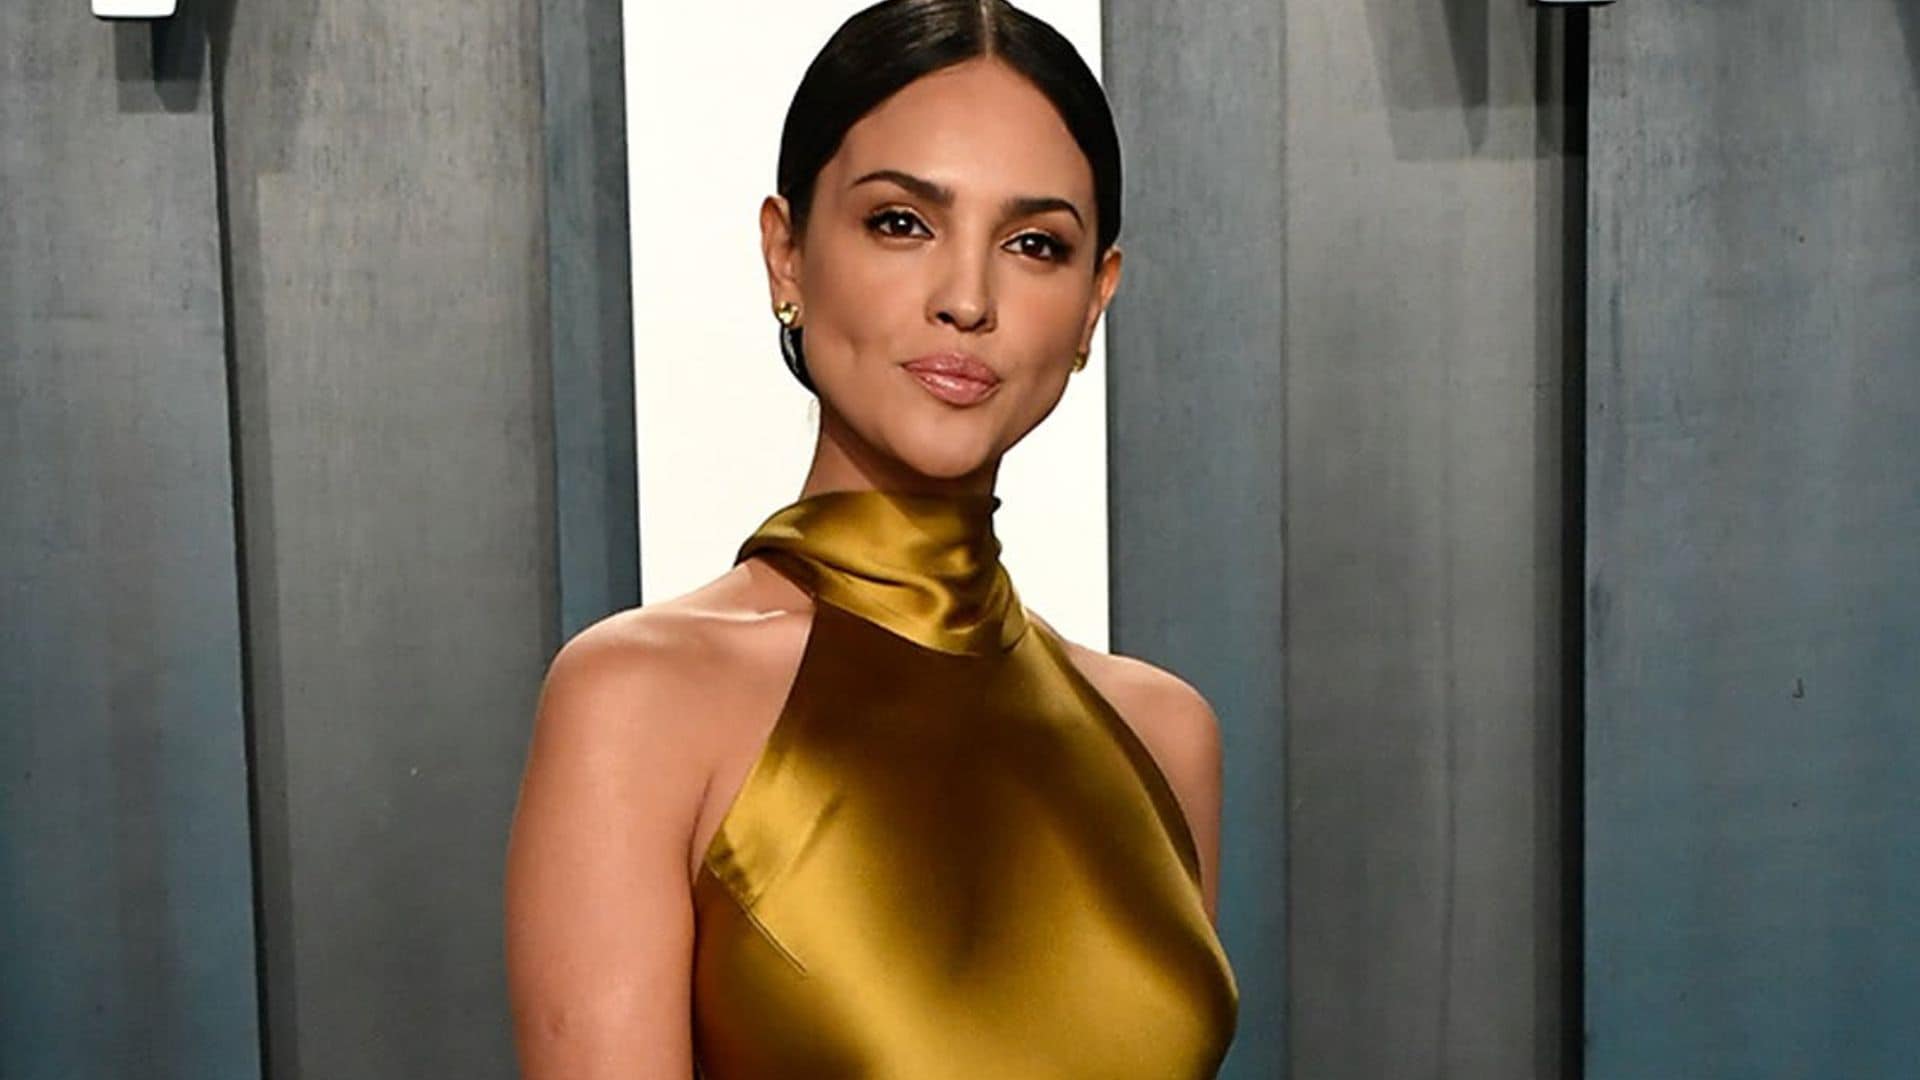 Eiza Gonzalez looked stunning in green for an appearance on Jimmy Kimmel Live!